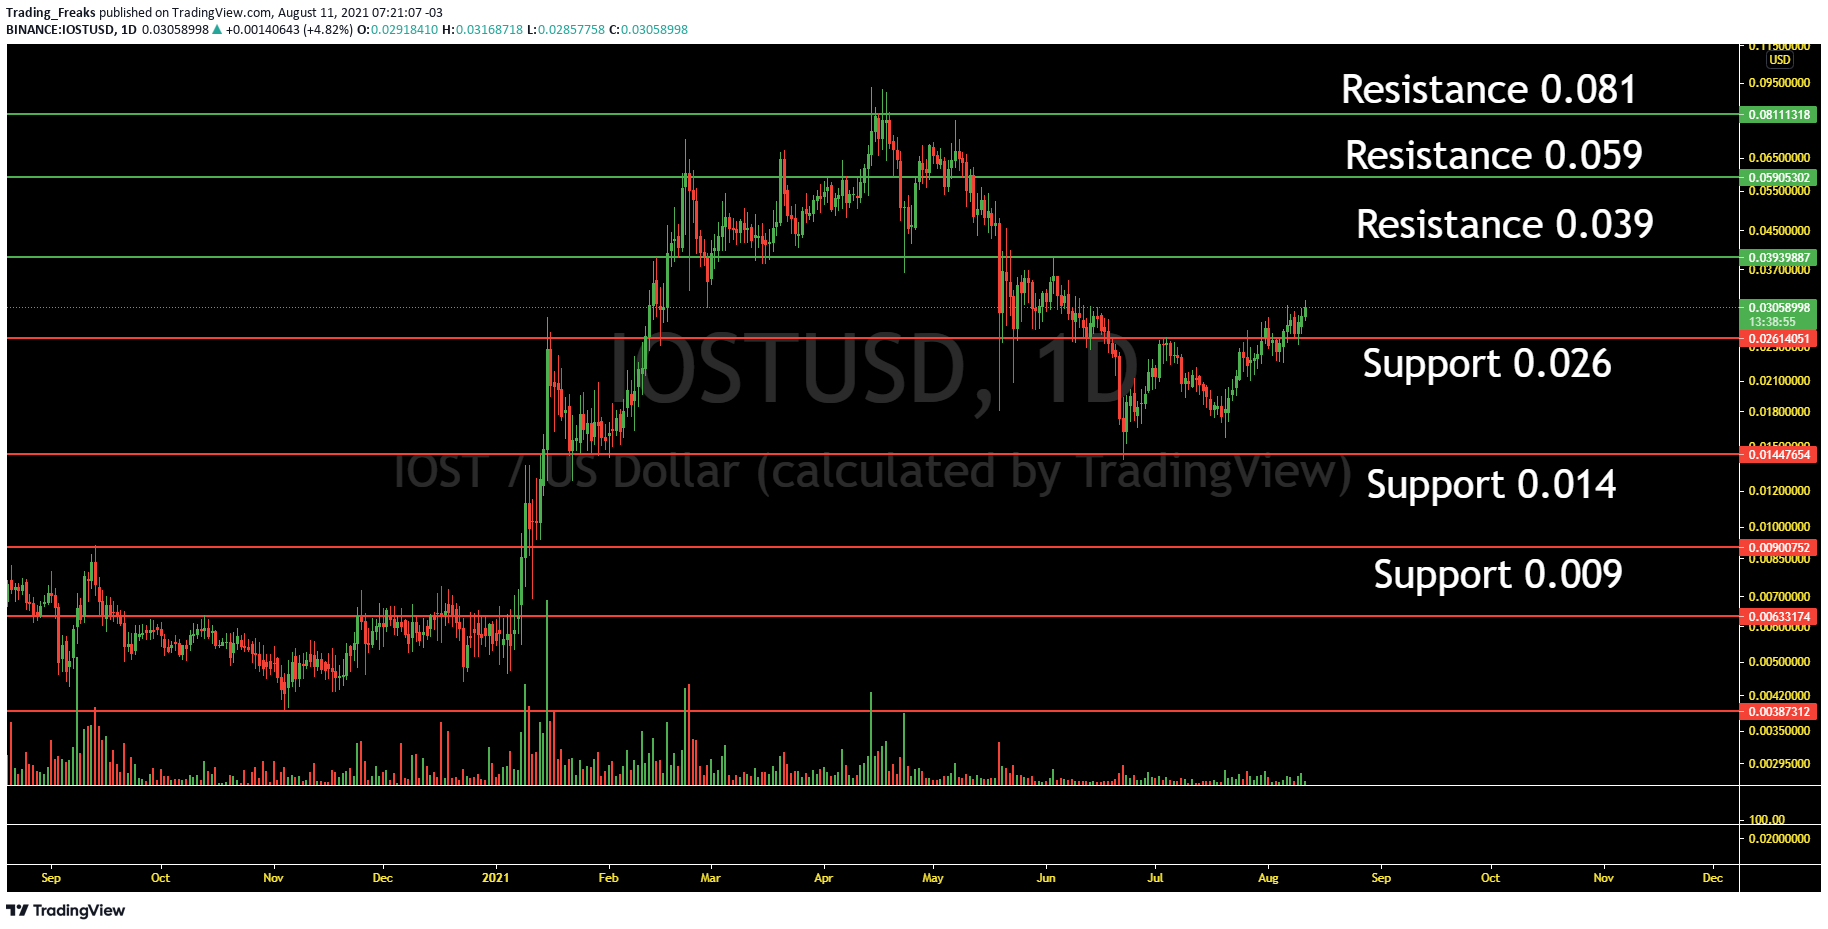 IOST Price Prediction 2021 - Will IOST Hit $0.1 Soon ...